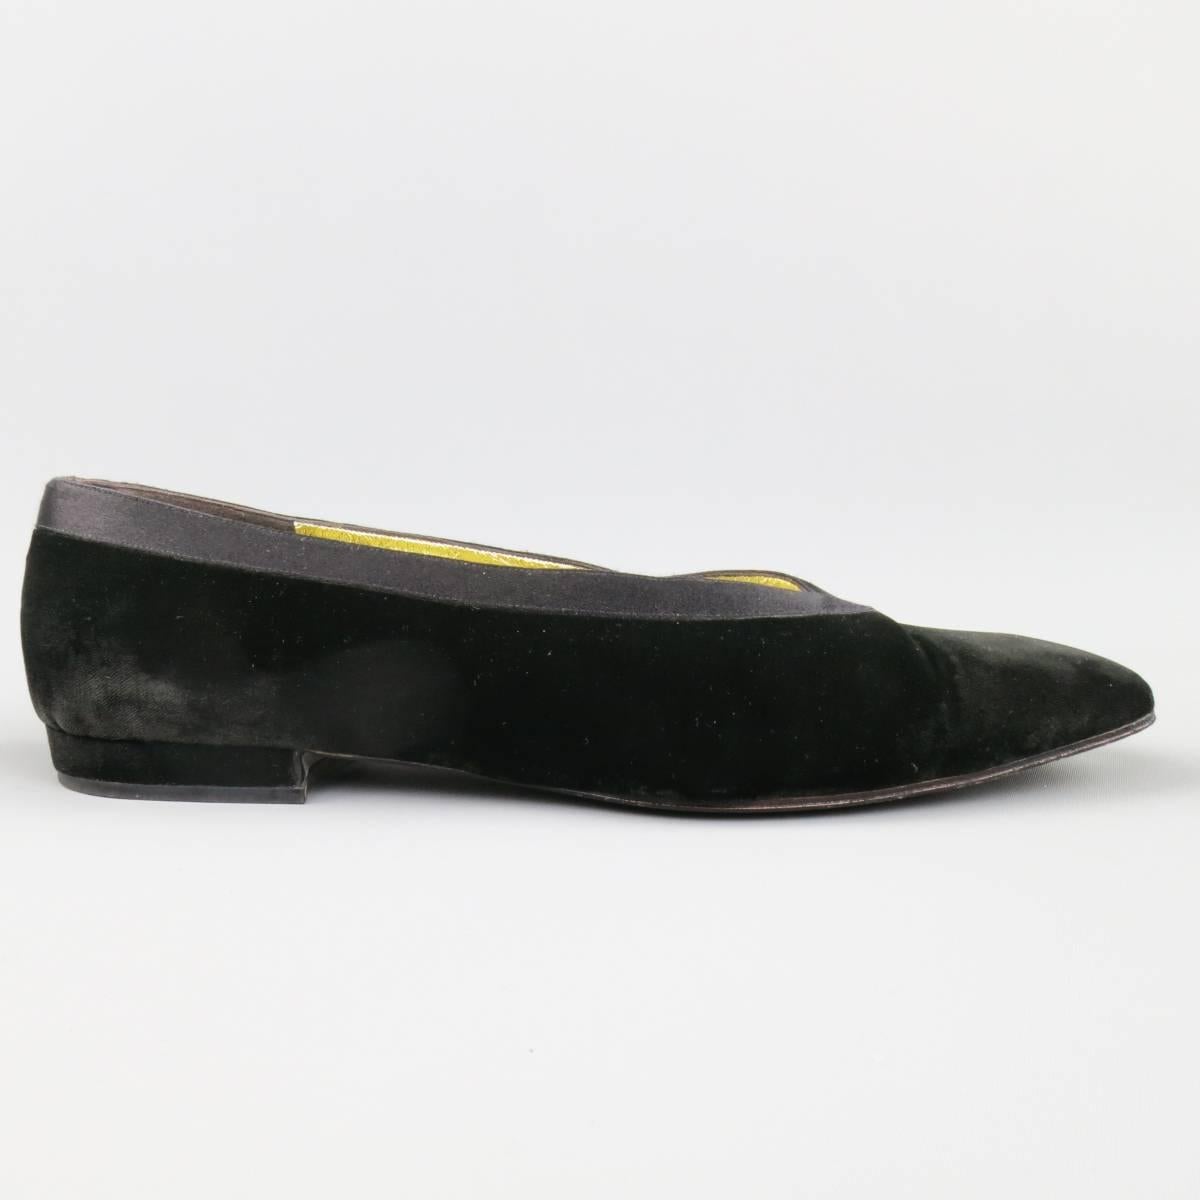 Vintage CHANEL flats in a black velvet featuring a squared off pointed toe, low velvet heel, silk tuxedo stripe round top line, and metallic gold liner. Minor wear throughout. Made in Italy.
 
Good Pre-Owned Condition.
Marked: IT 36.5
 
Heel: 0.5